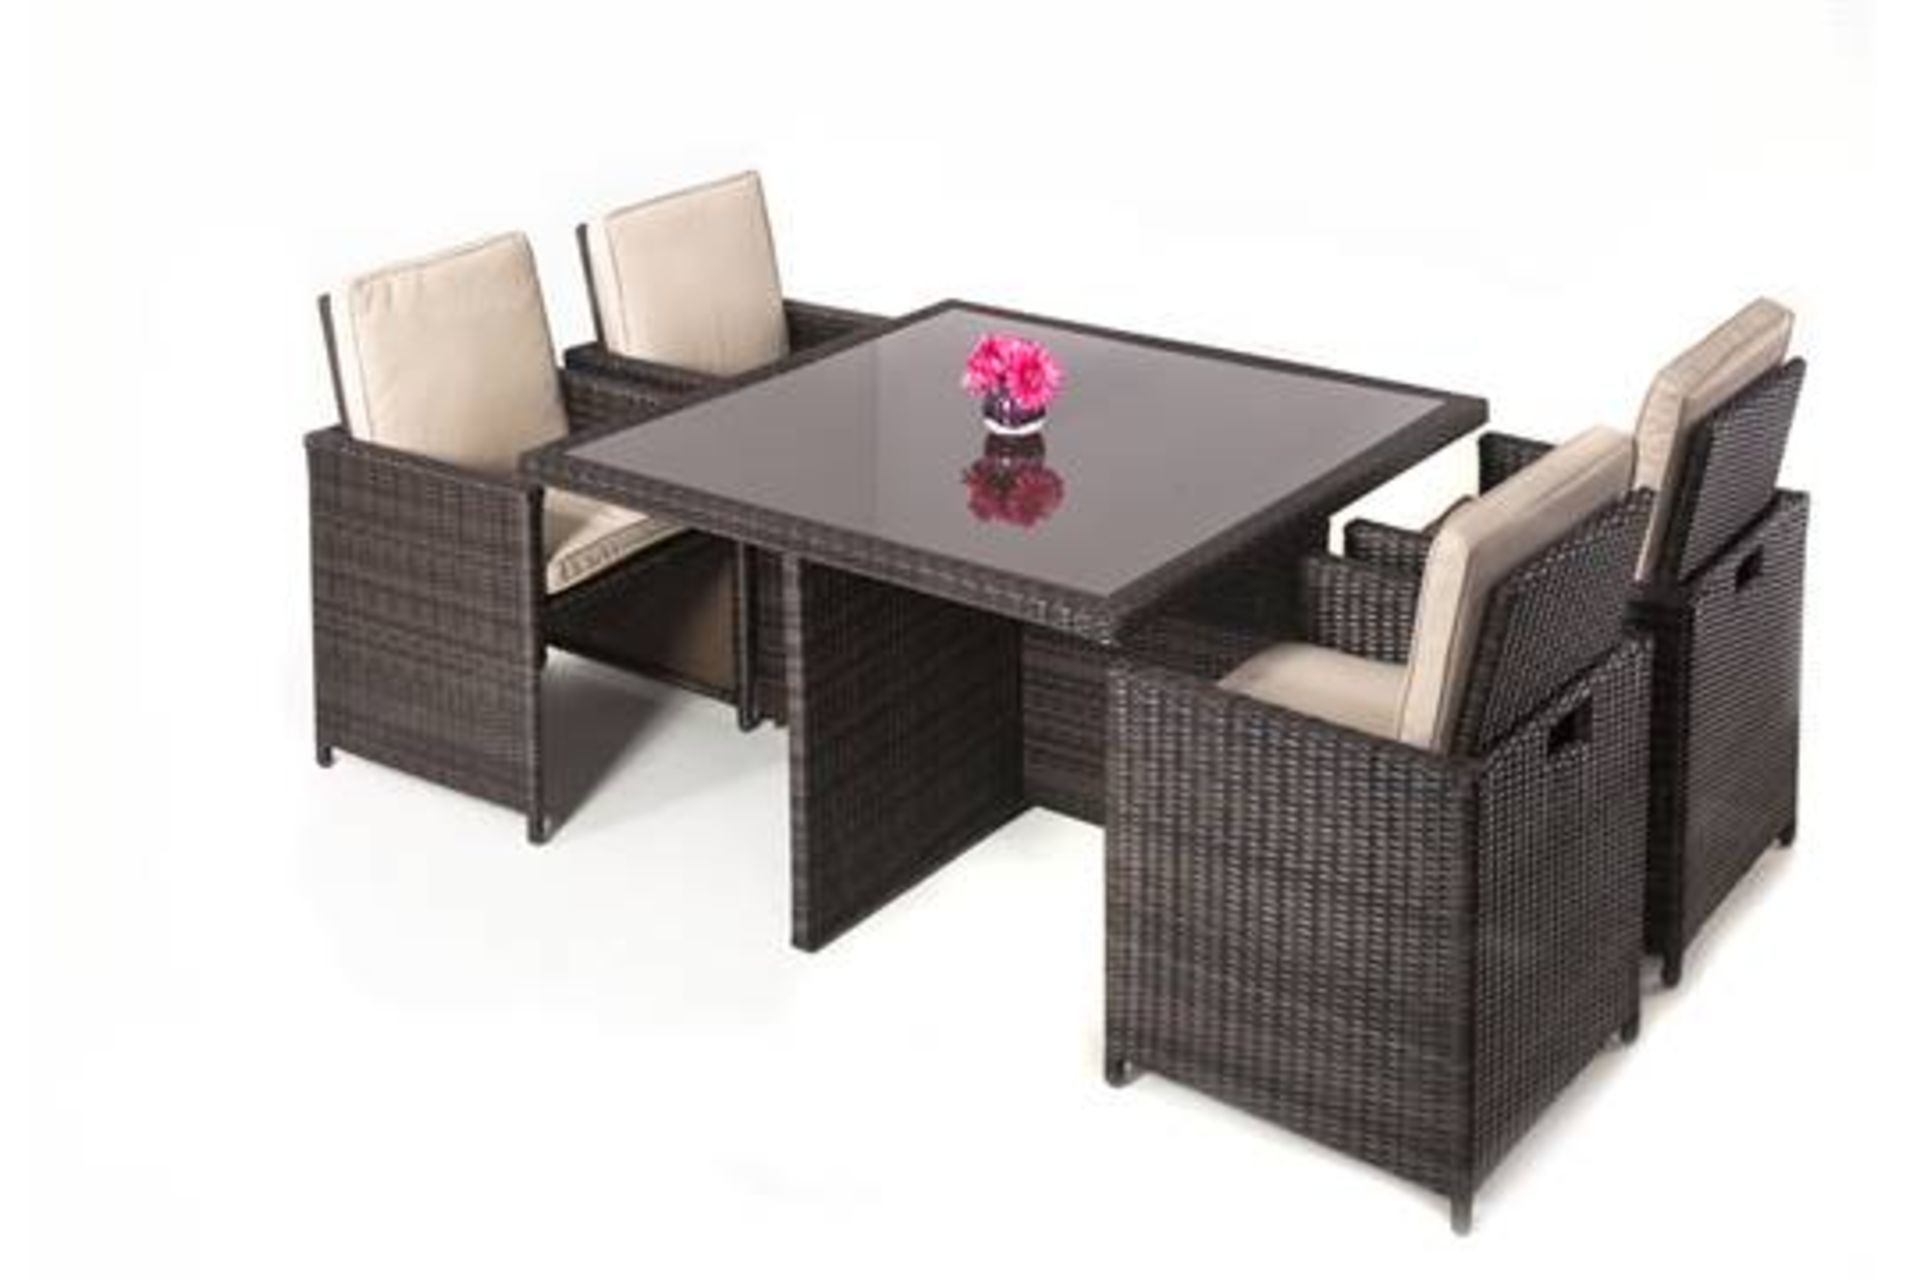 The Barcelona 5 Piece Rattan Garden Cube Set in chocolate mix with
coffee cream cushions.